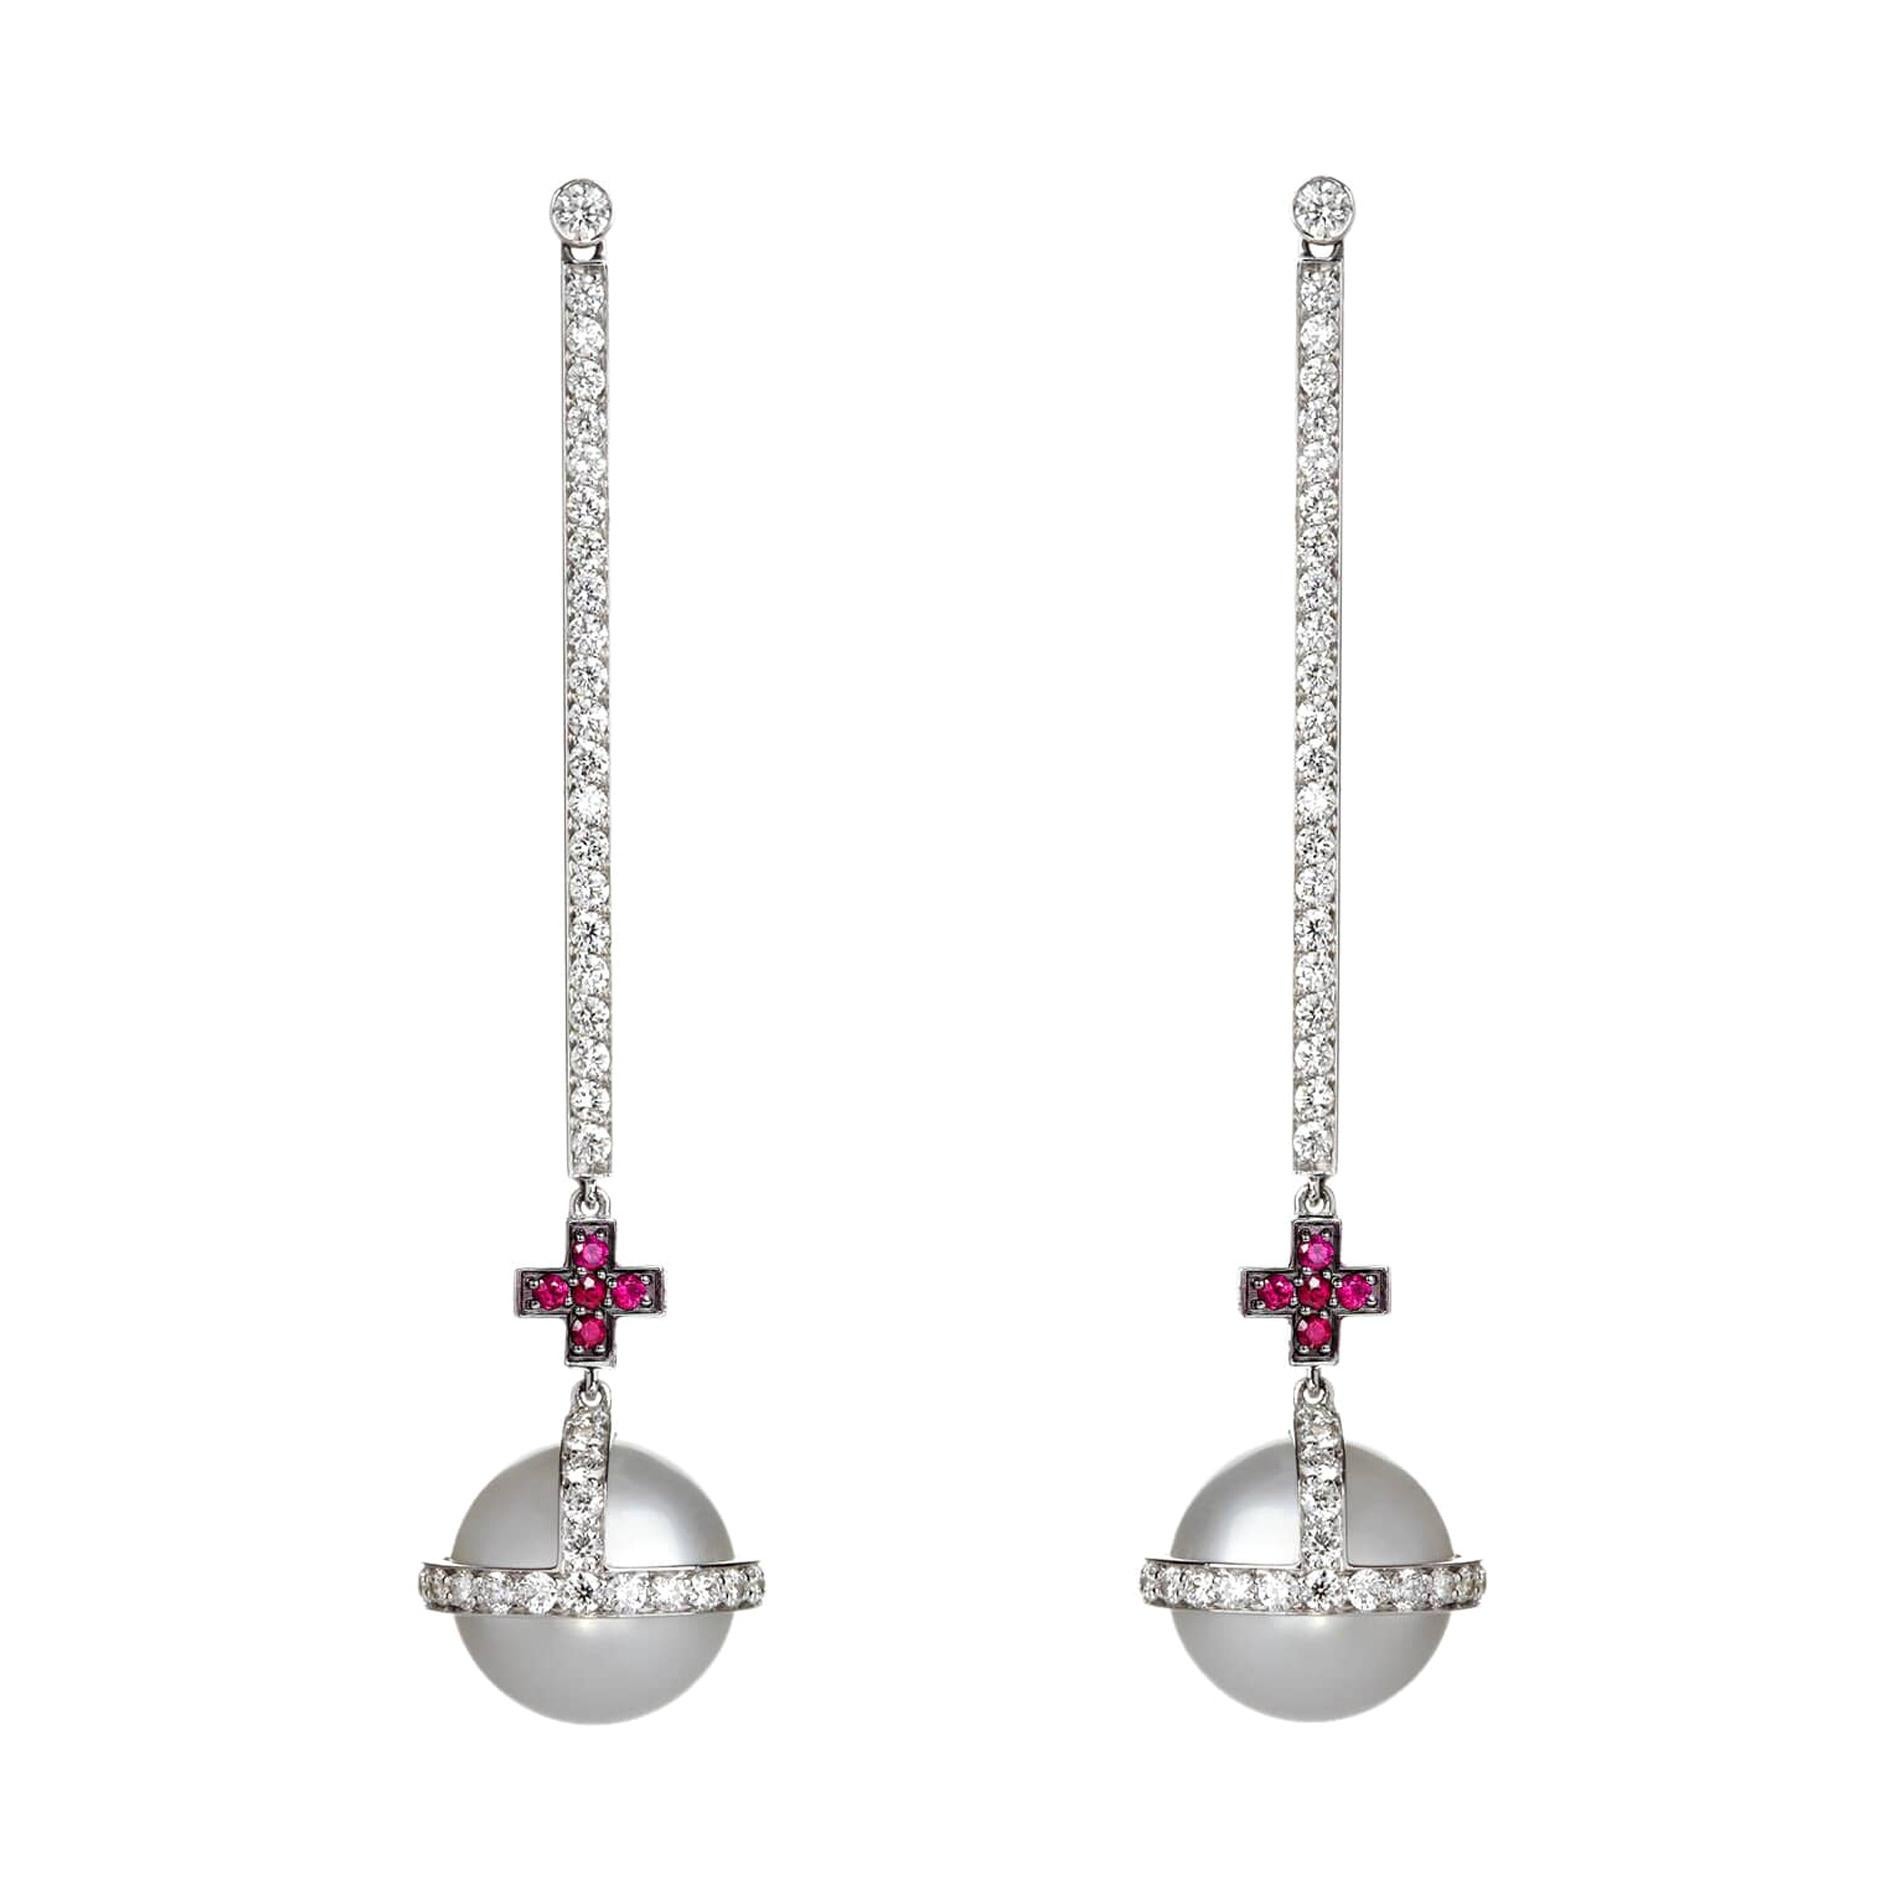 Sybarite Sceptre Drop Cross Earrings in White Gold with White Diamonds & Rubies